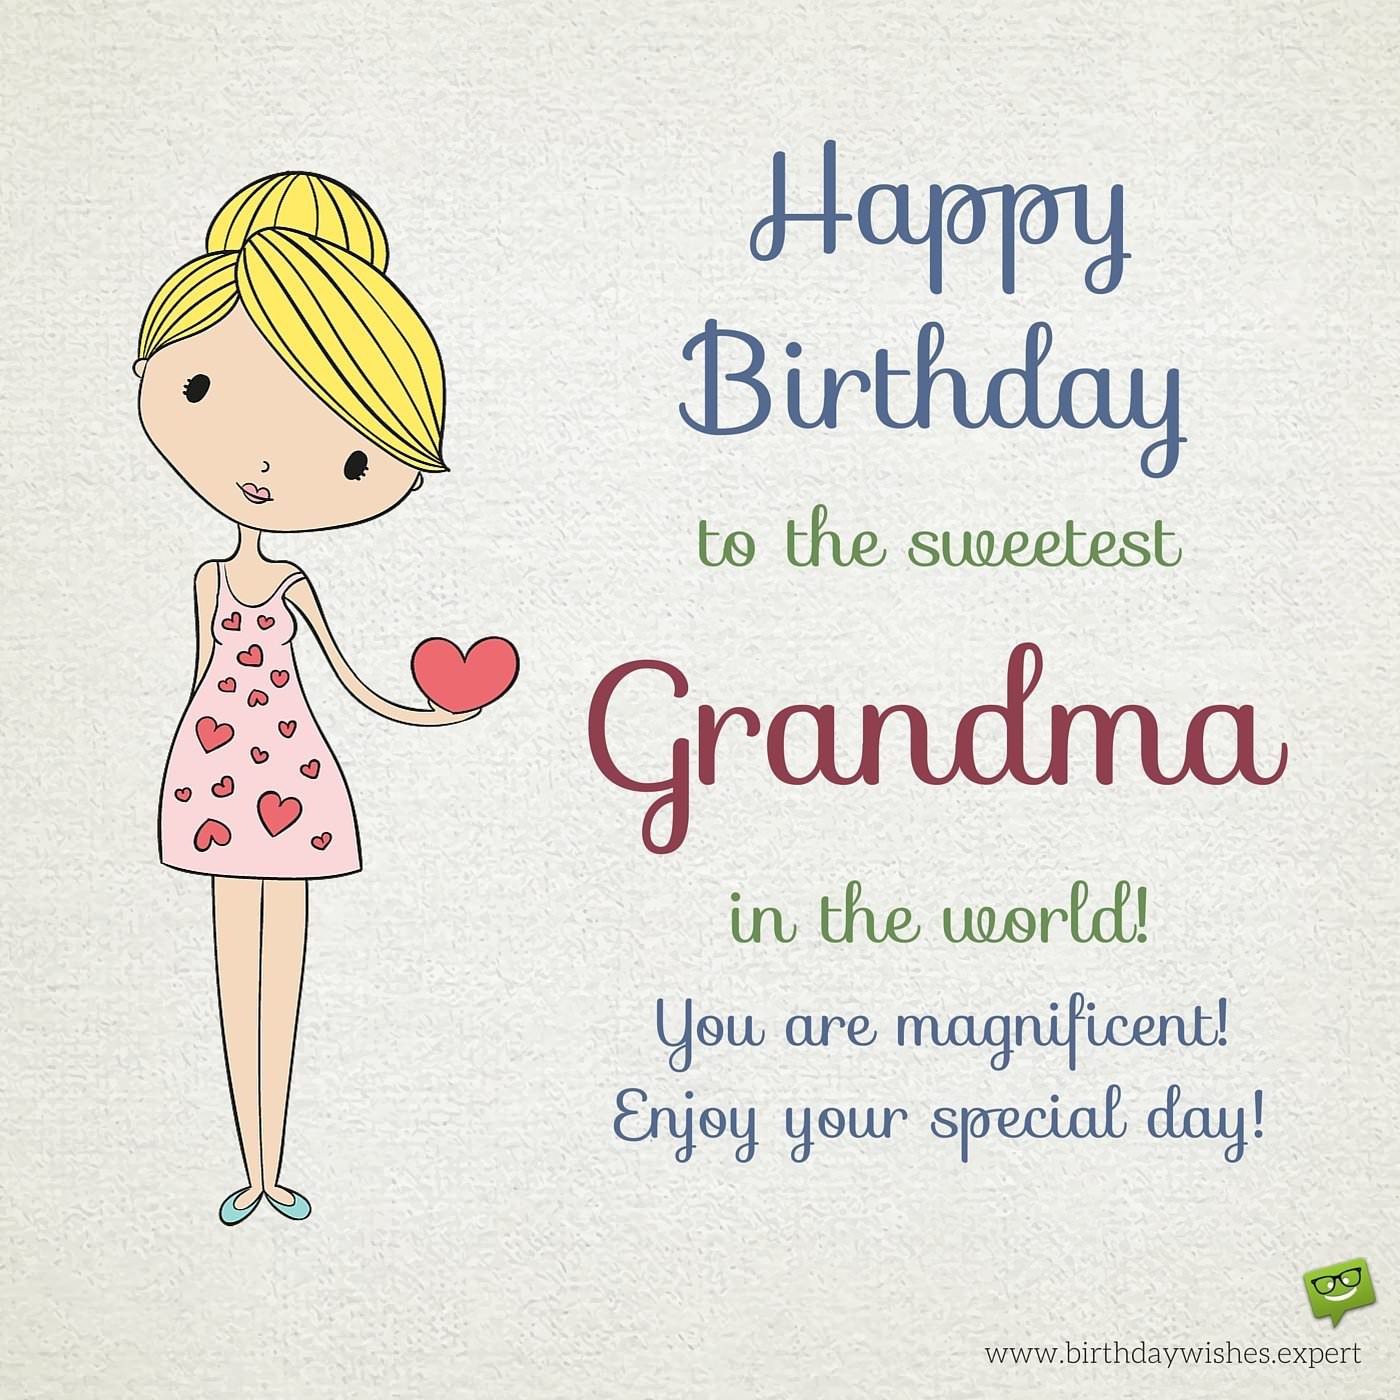 70 Touching Birthday Wishes for Your Grandma's Special Day